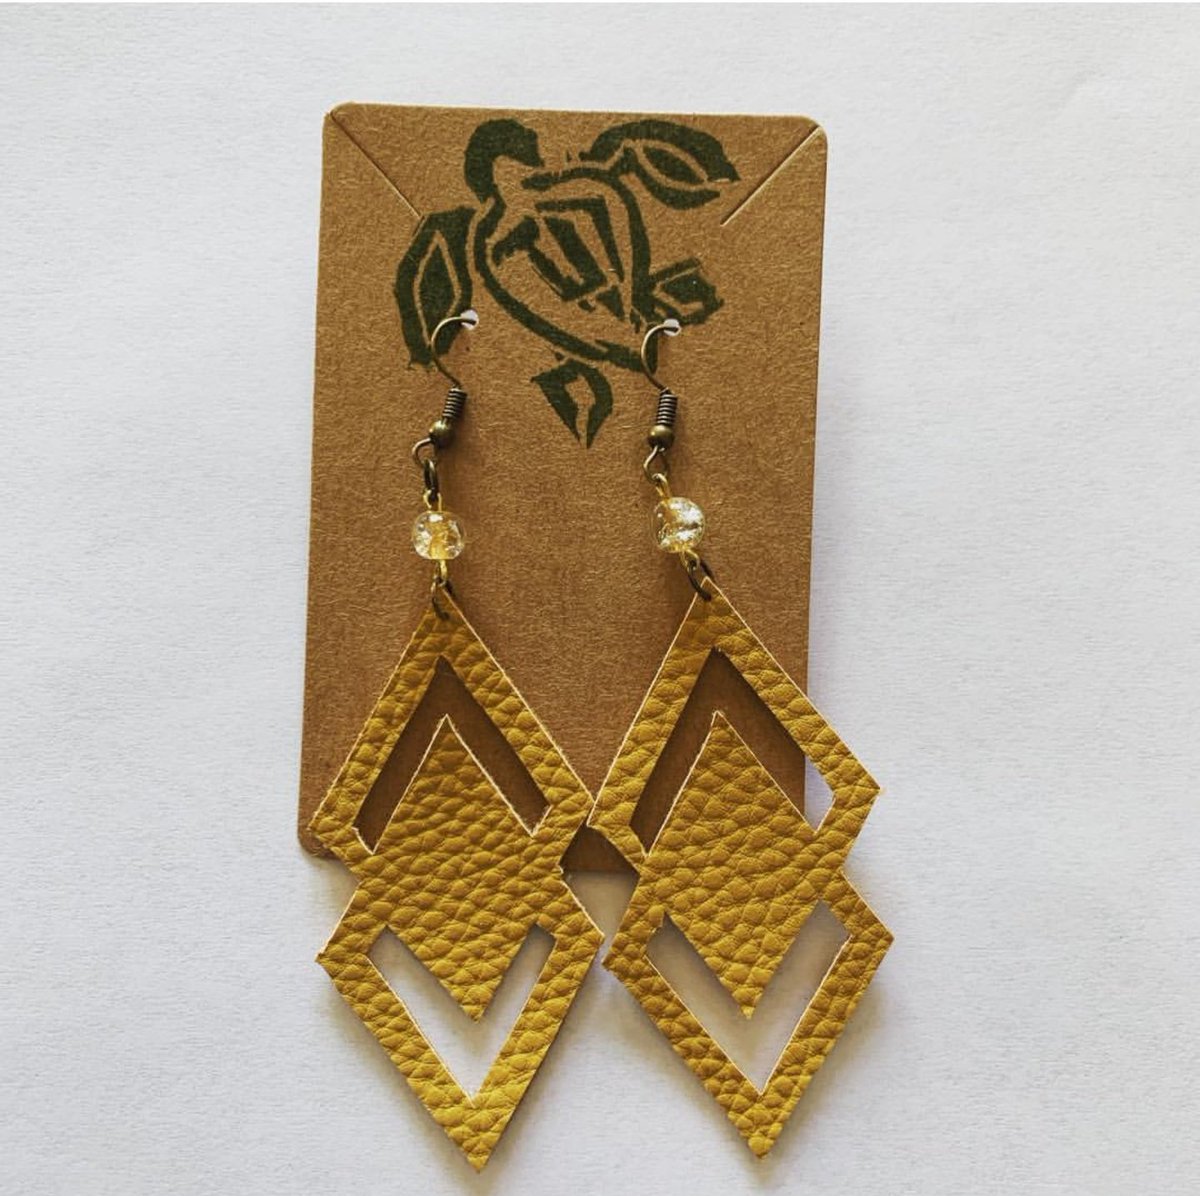 Custom handmade earring faux leather, with bead accents $10
-
-
#jewelybyturtle #handemadejewelry #makersgonnamake  #monmouthcounty